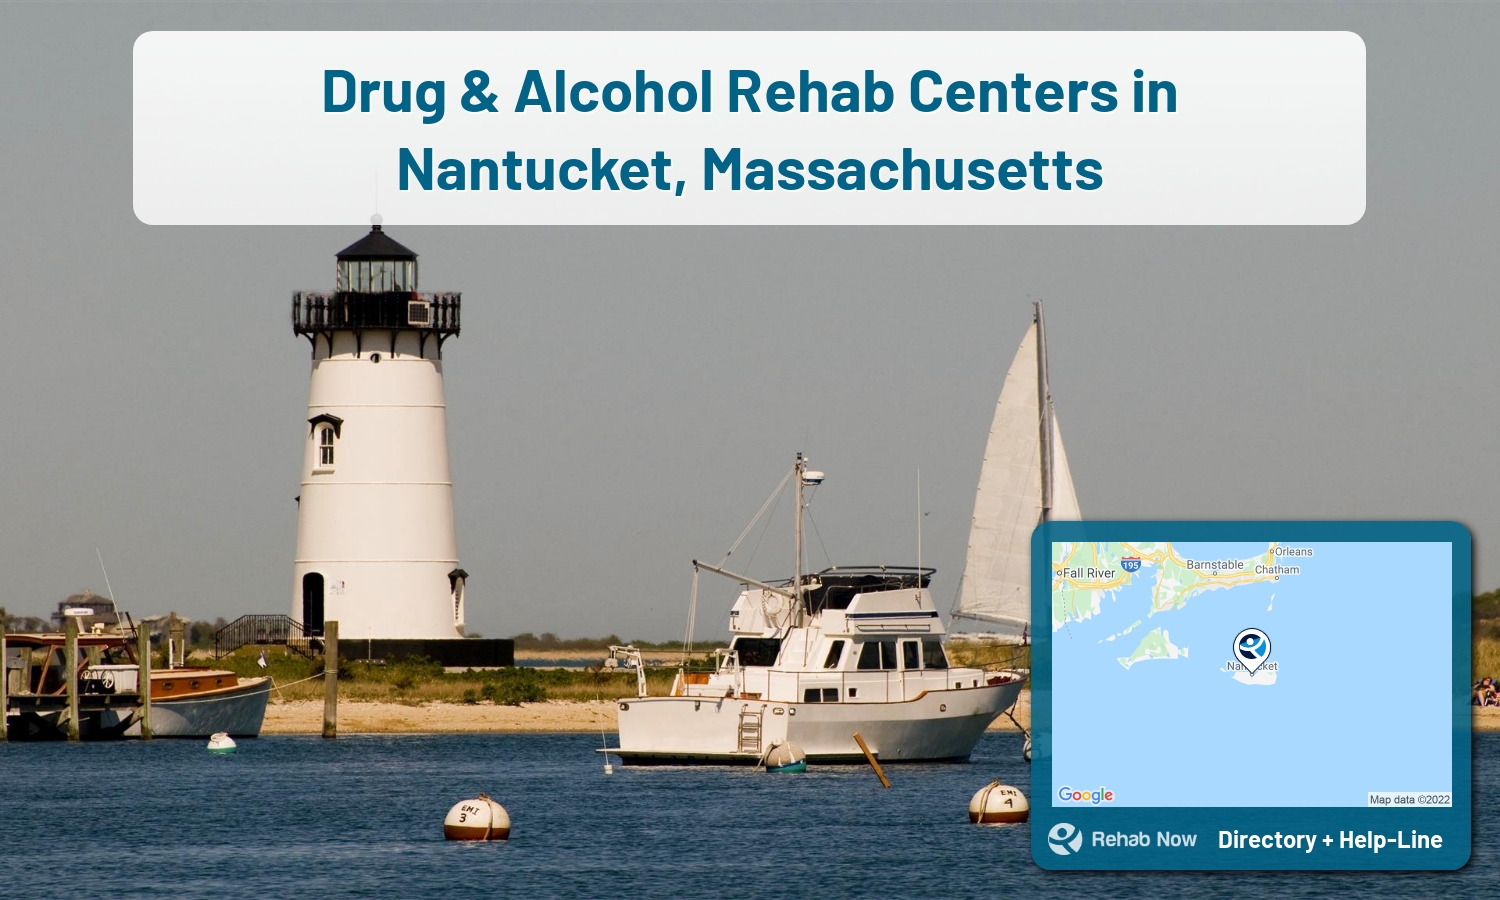 Find drug rehab and alcohol treatment services in Nantucket. Our experts help you find a center in Nantucket, Massachusetts